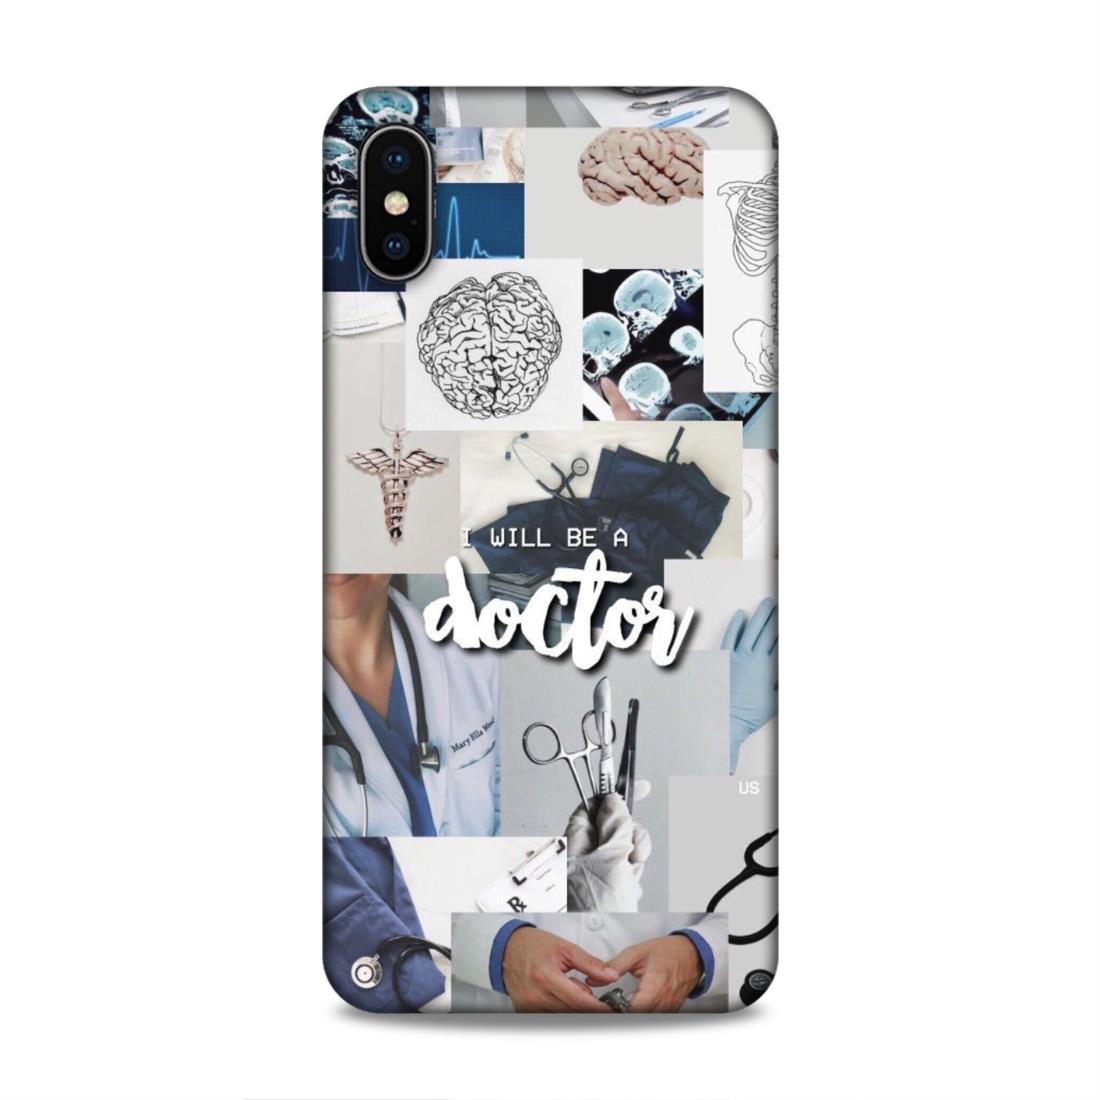 Will Be a Doctor Hard Back Case For Apple iPhone XS Max